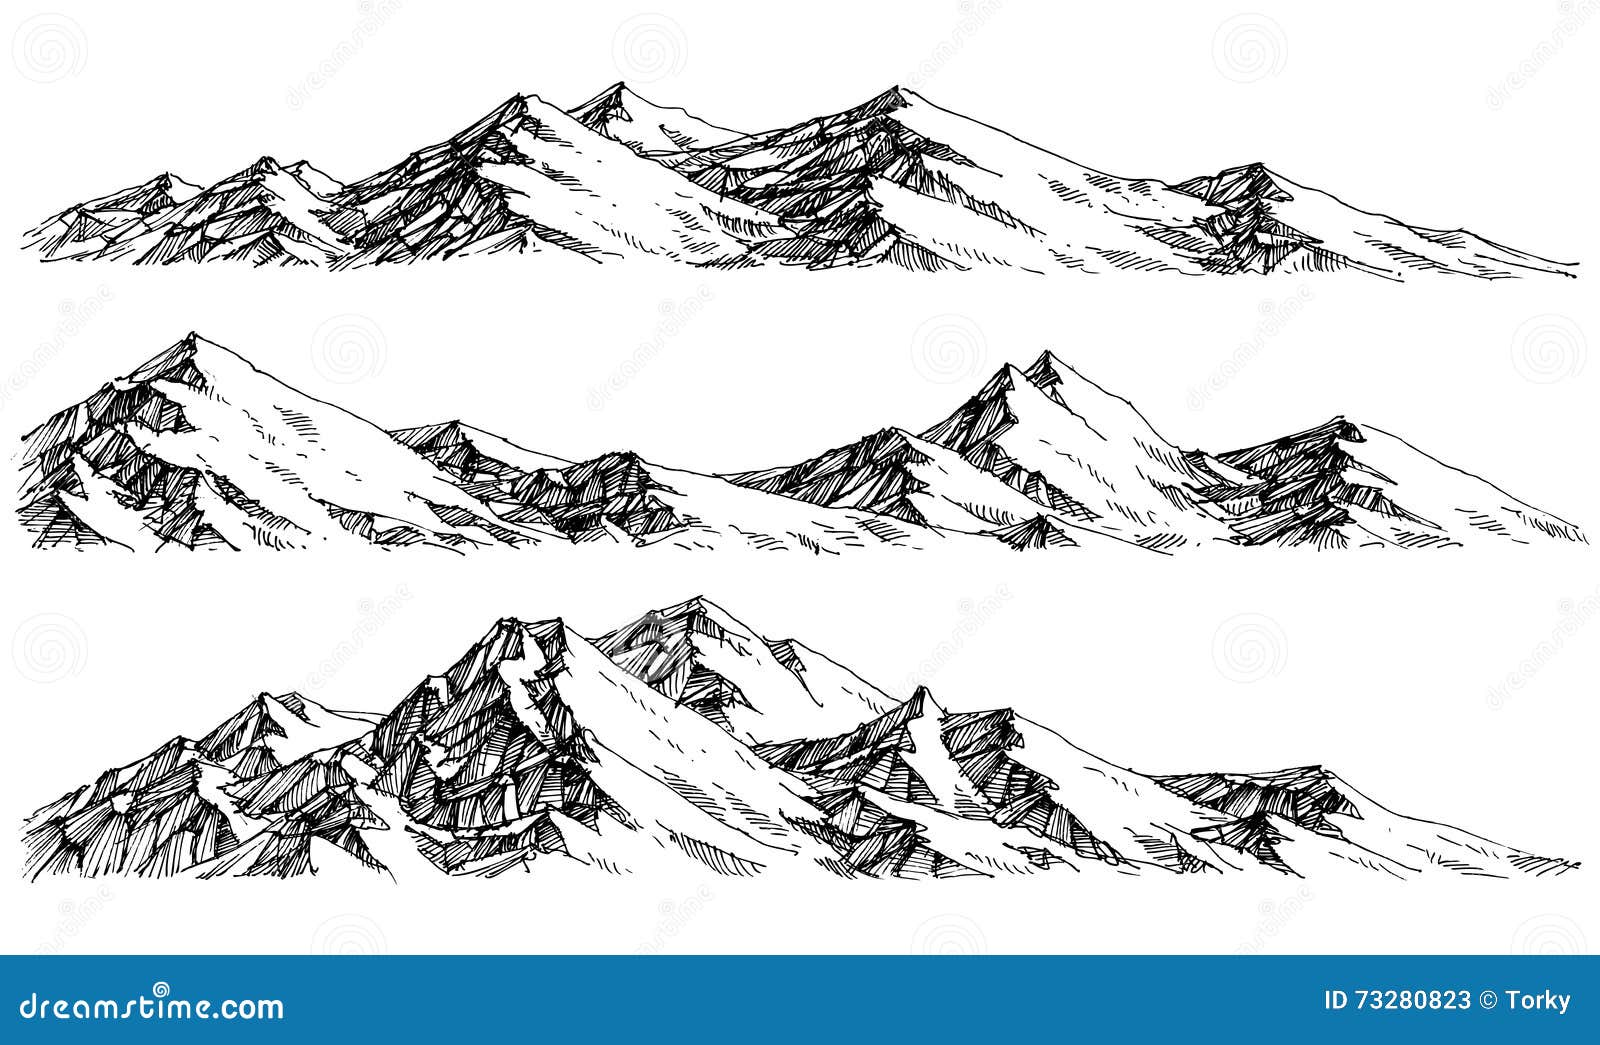 Mountains Illustrations and Clip Art 373785 Mountains royalty free  illustrations drawings and graphics available to search from thousands of  vector EPS clipart producers